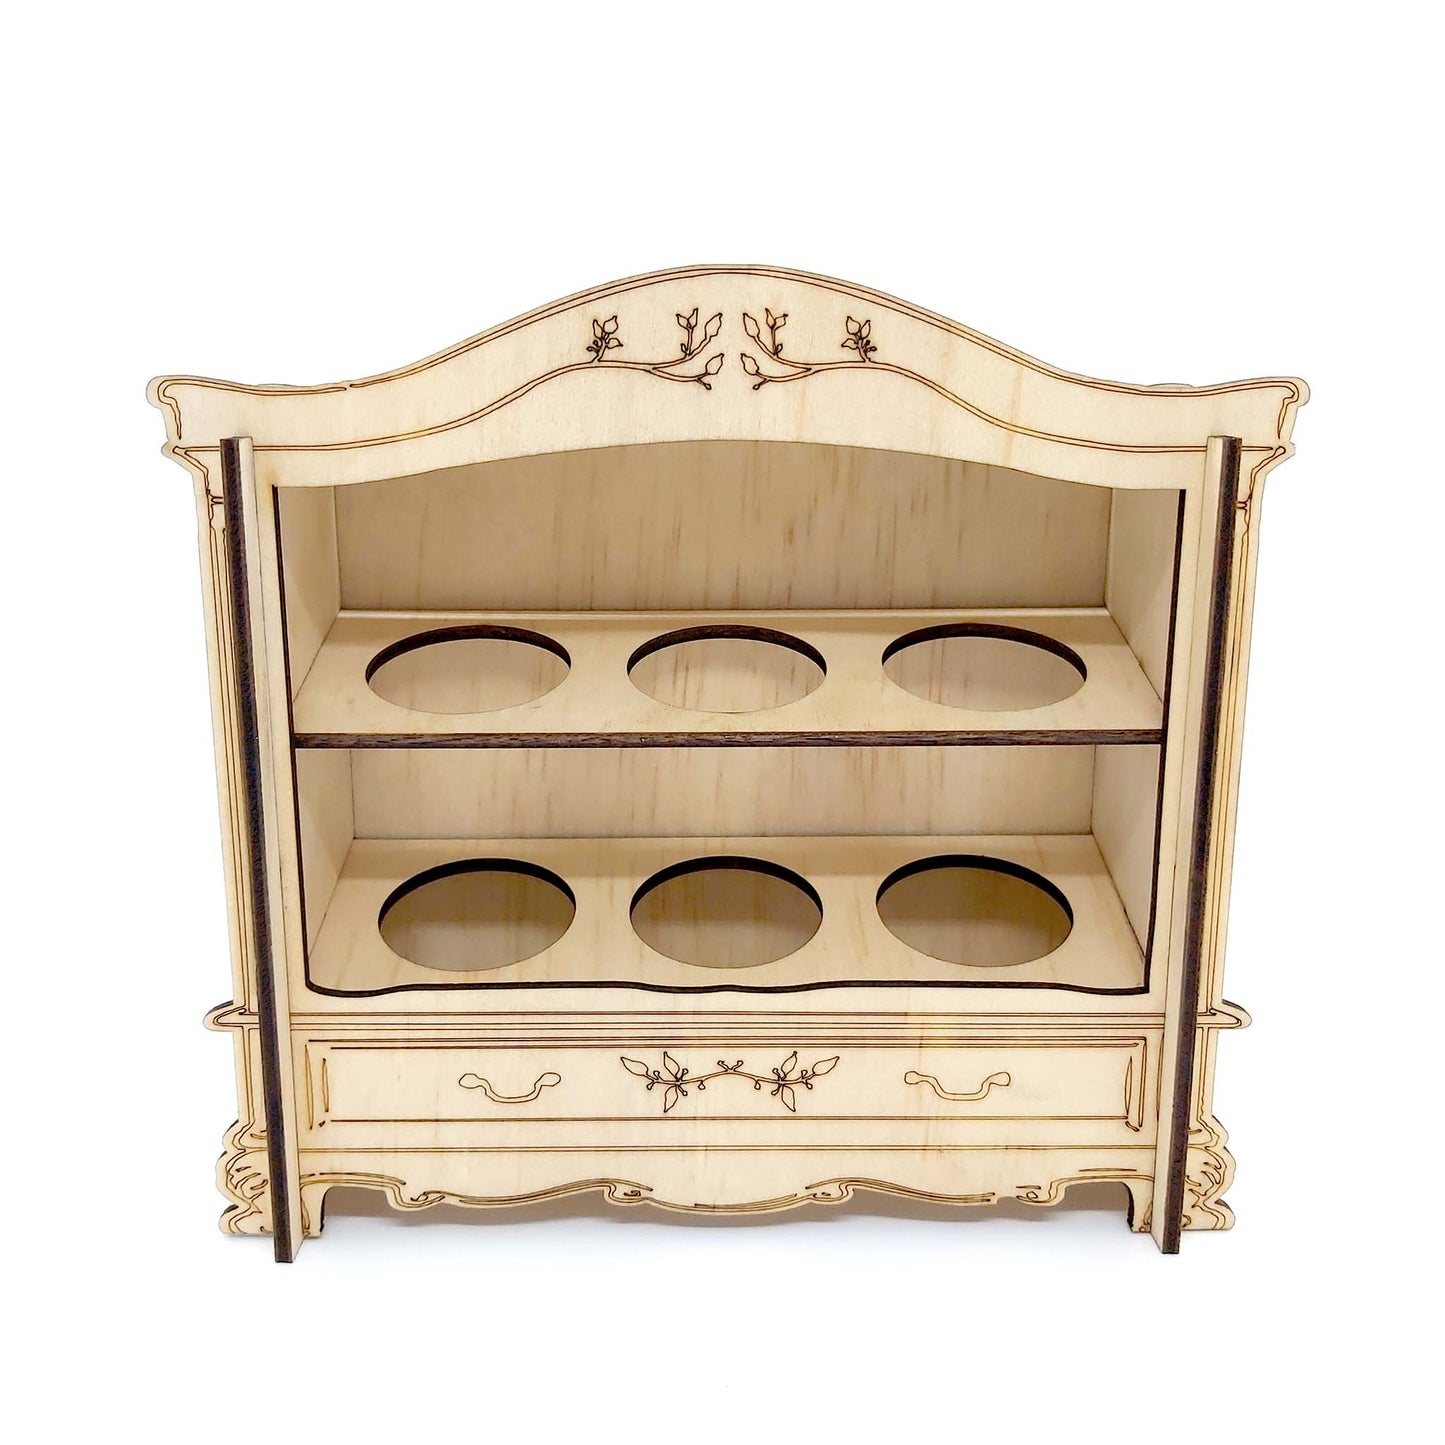 The Fragrance Wardrobe - handcrafted timber display for your favourite Perfume Balms